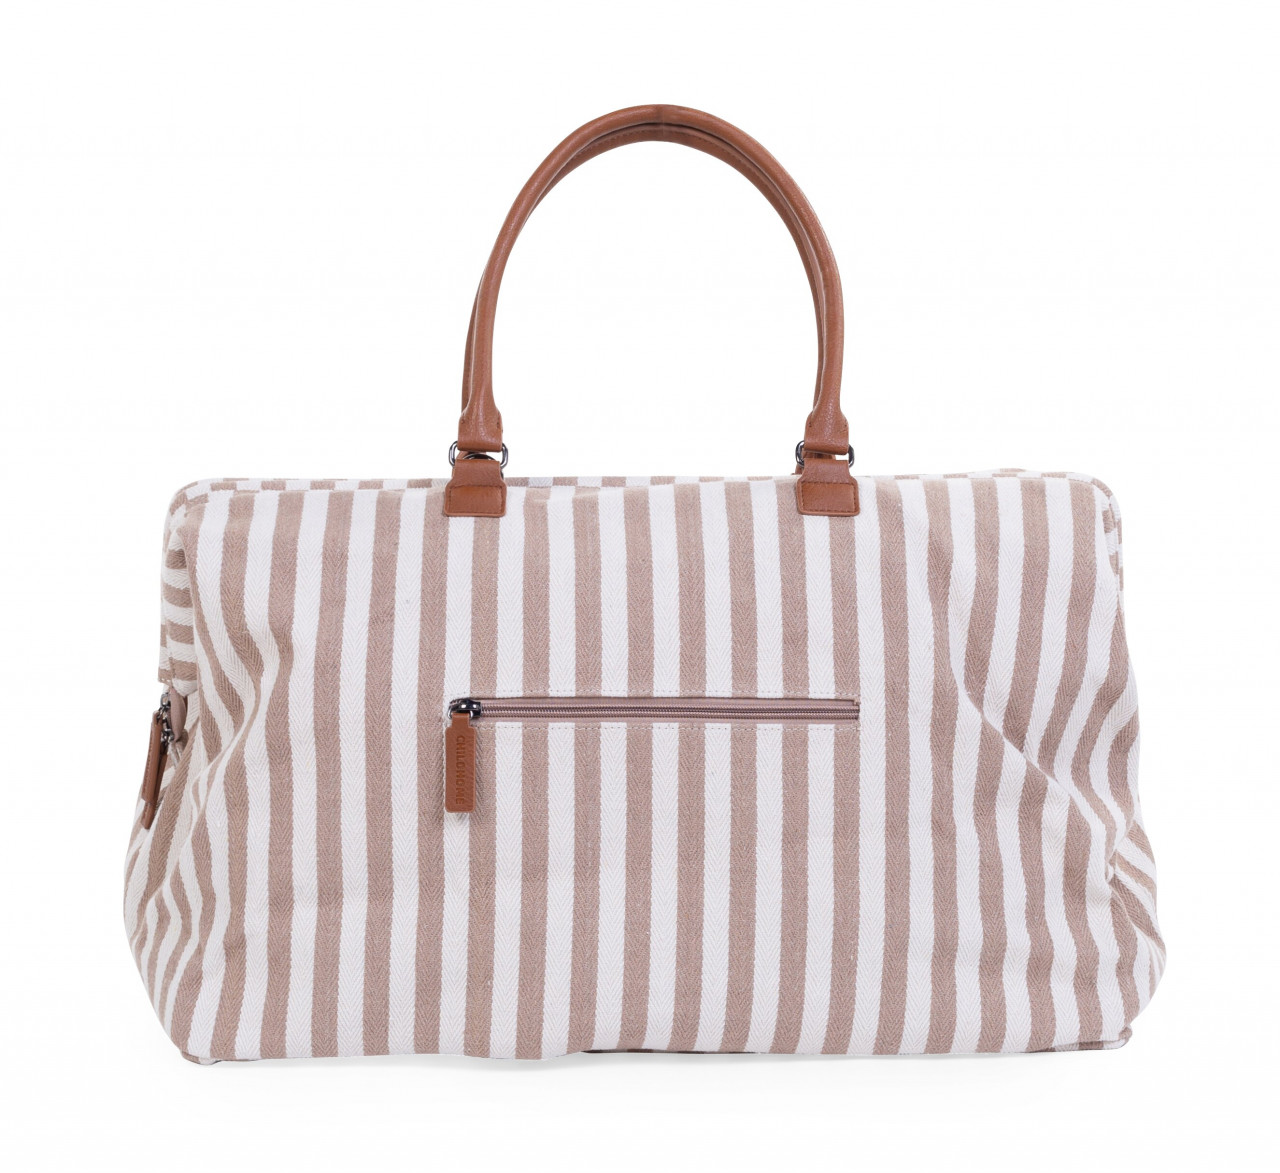 Childhome MOMMY BAG BIG, Stripes - Nude/Terracotta